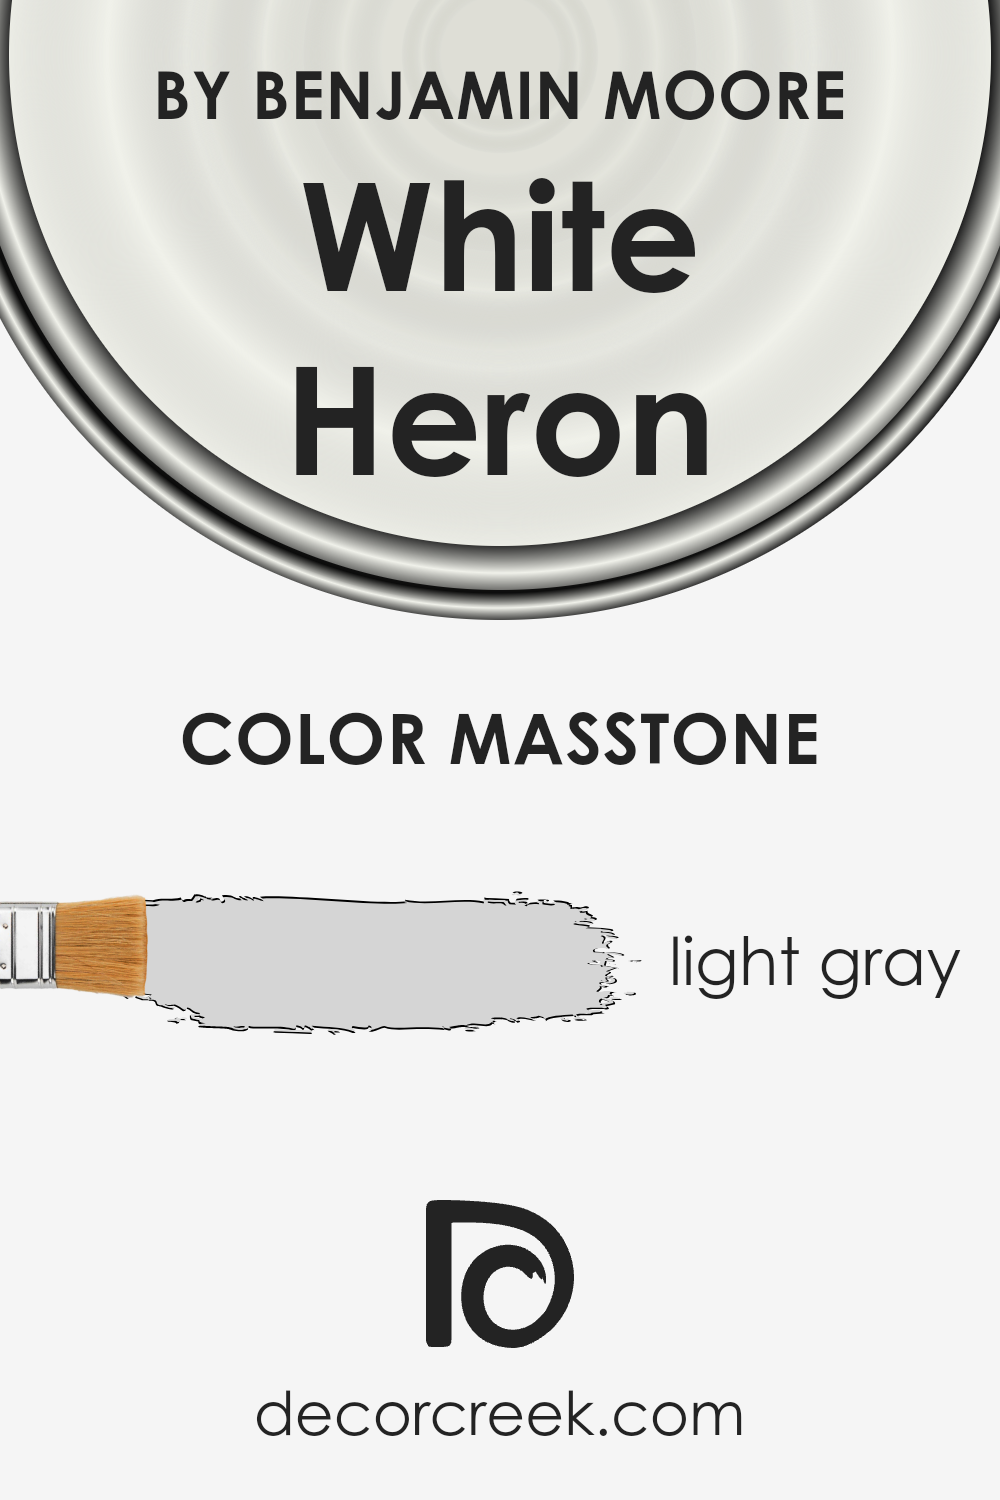 what_is_the_masstone_of_white_heron_oc_57